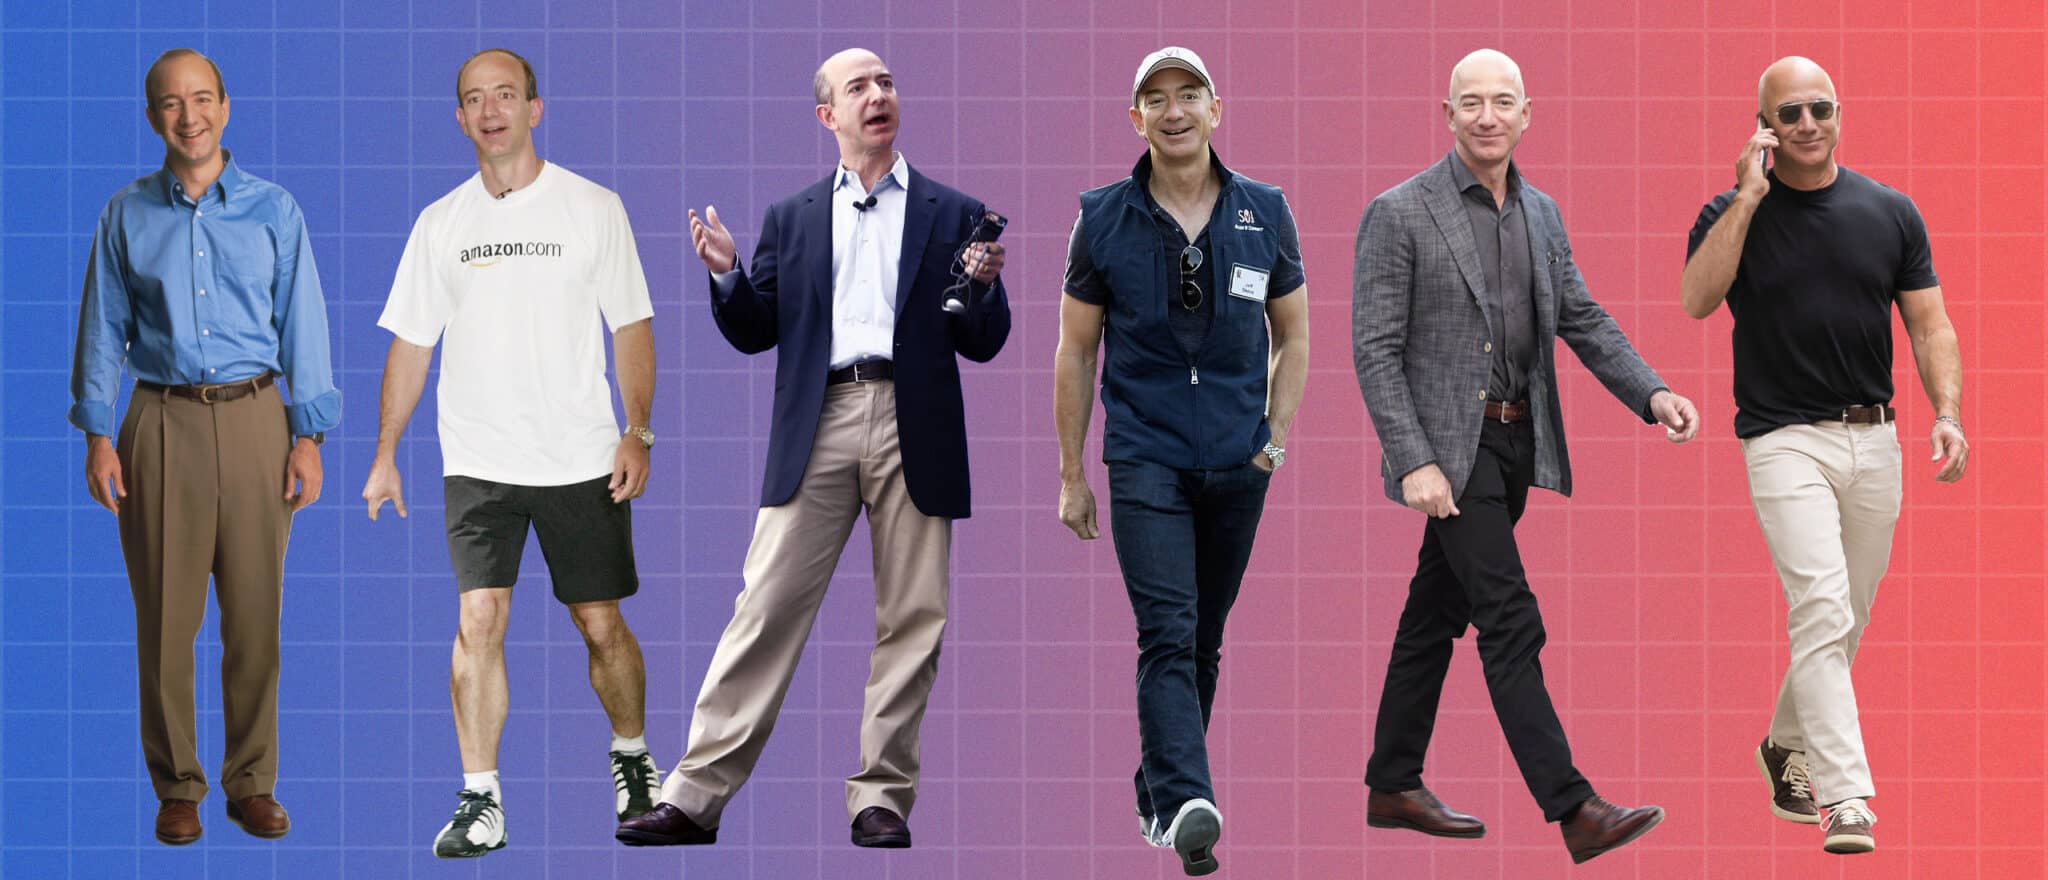 Jeff Bezos Is Rich. But That’s Not Why He’s Jacked. Here’s How He Does It